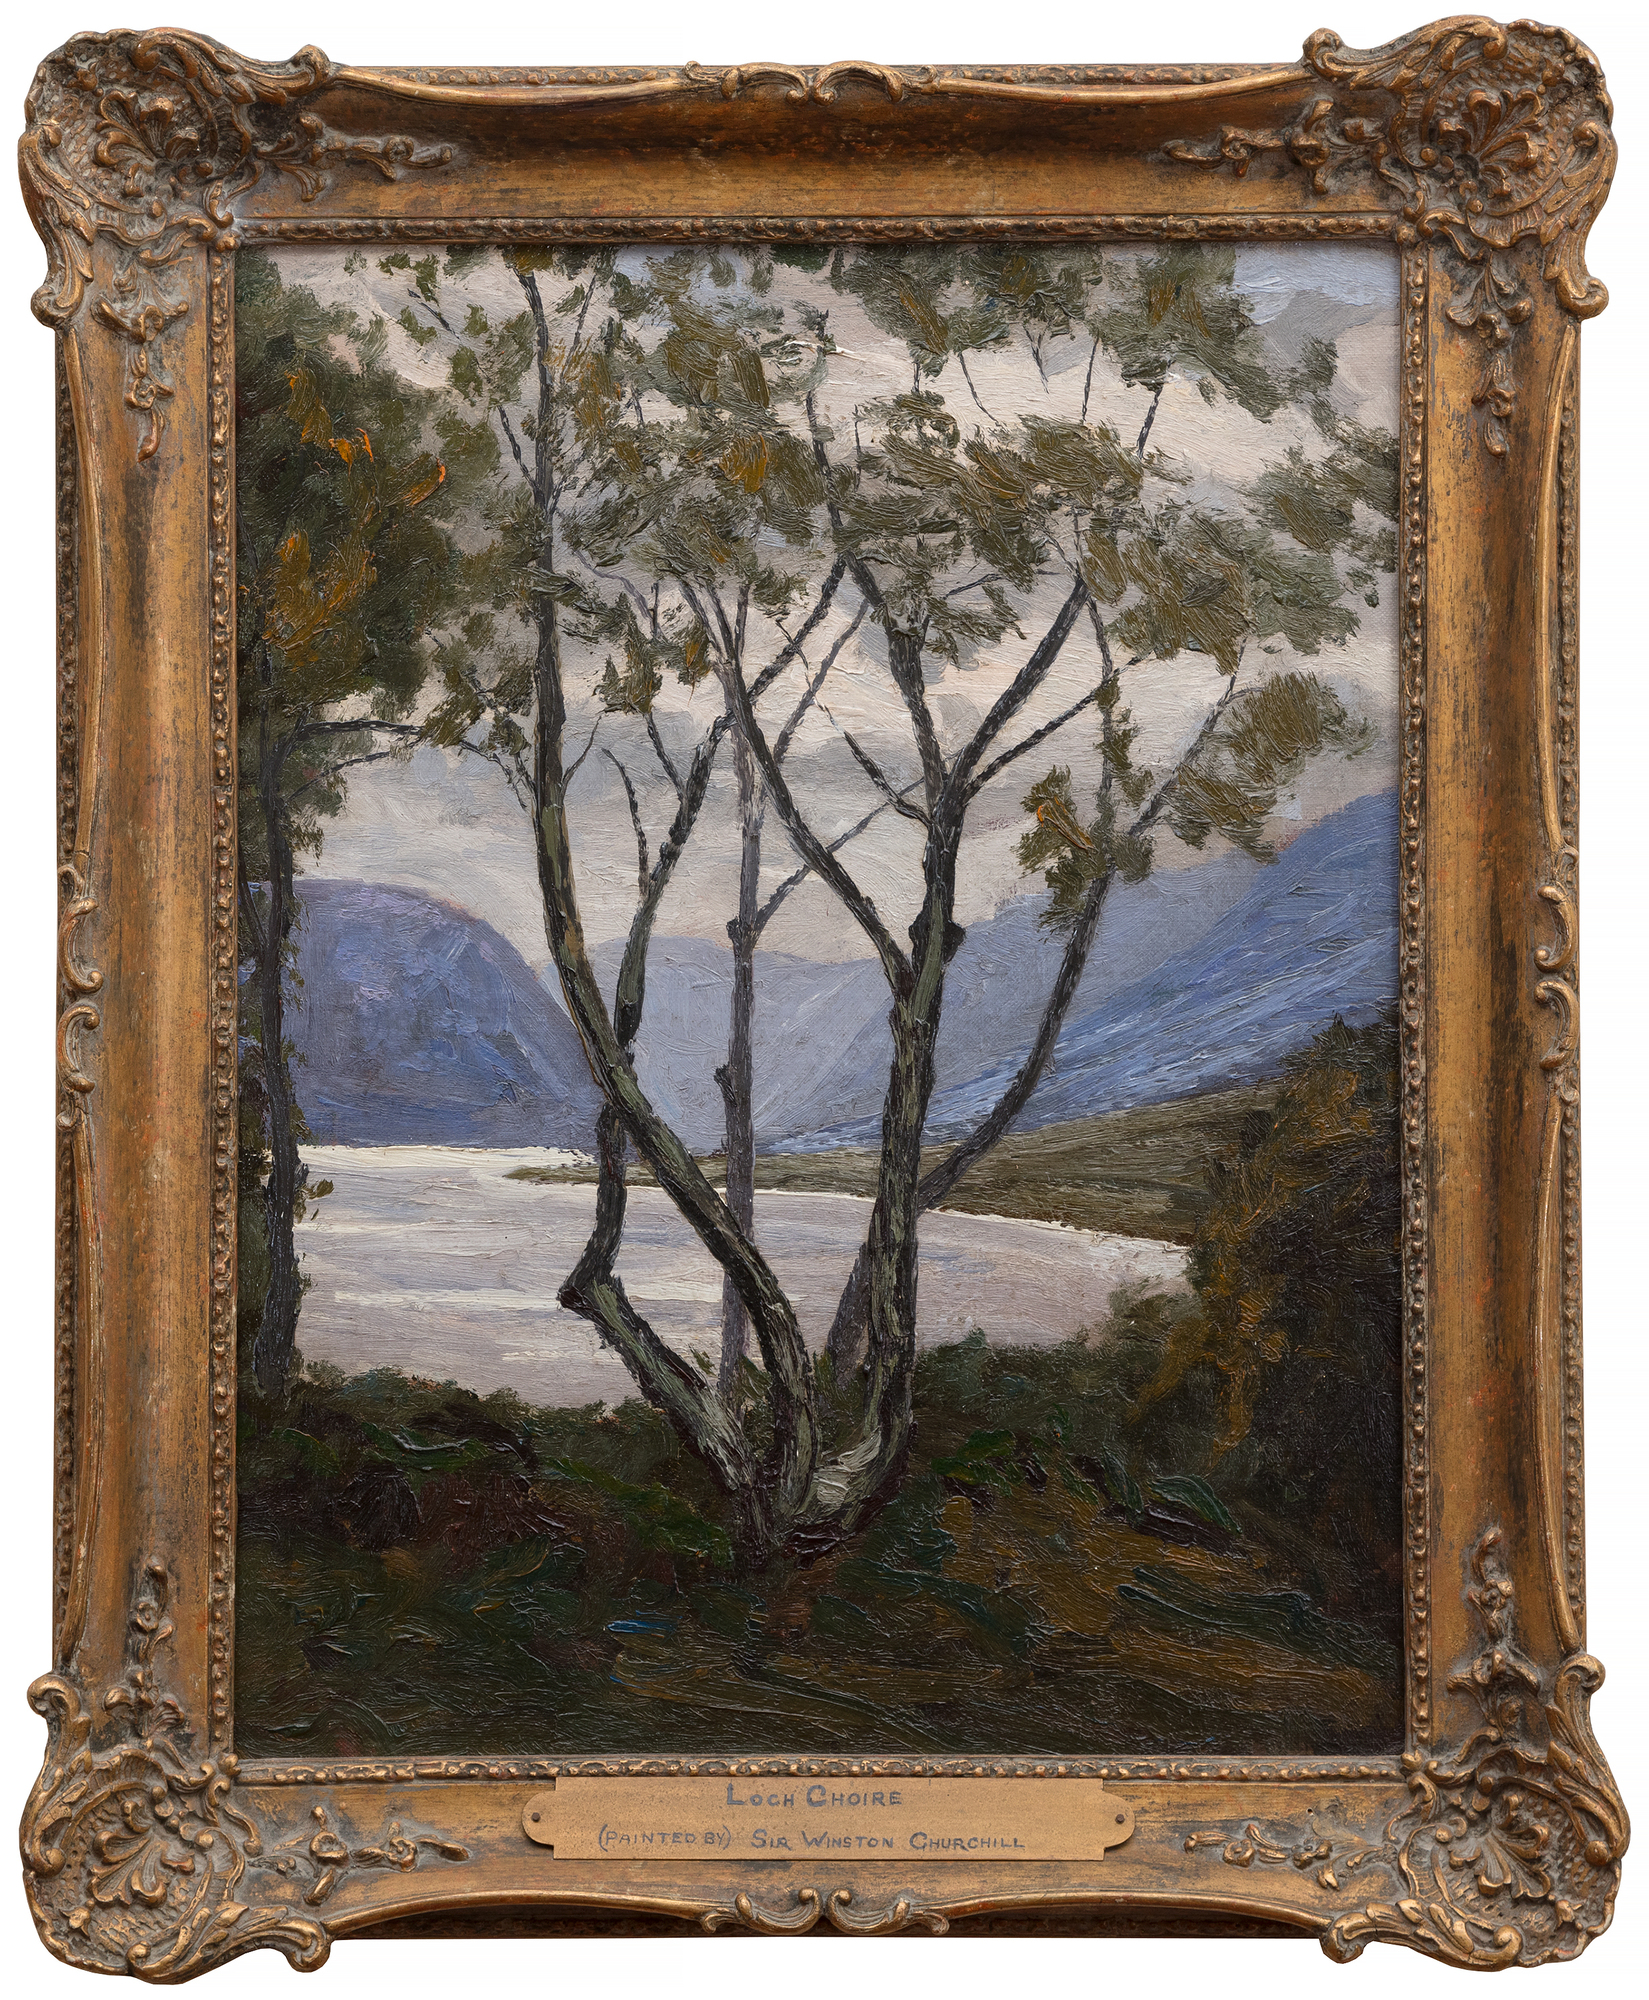 Painted while staying at Dunrobin Castle, the estate of the Duke of Sutherland, Churchill chose to set his easel behind a tree where he likely thought of it as a framing device, adding a layer of depth, creating a stronger sense of foreground, middle ground, and background, enhancing the three-dimensionality of the picture. Churchill painted at both Dunrobin as well as the Duke’s Sutton Place estate, later the home of John Paul Getty.
<br>
<br>As Mary Soames describes it in her book, Winston Churchill, His Life as a Painter, “1921 had been a year of heavy personal tidings” for Churchill and his family, as he lost both his mother, Jennie Cornwallis-West, and his beloved child, Marigold, aged nearly four.  In a letter to his wife Clementine, Churchill wrote, “… Many tender thoughts, my darling one of you and yr sweet kittens.  Alas I keep on feeling the hurt of the Duckadilly [Marigold’s pet name].”  That Churchill chose to stay with the Duke and Duchess at Dunrobin just after Marigold’s death speaks to their close friendship and his fondness for the area, including Loch Choire. It is no surprise that Churchill gifted the painting to the Duke of Sutherland